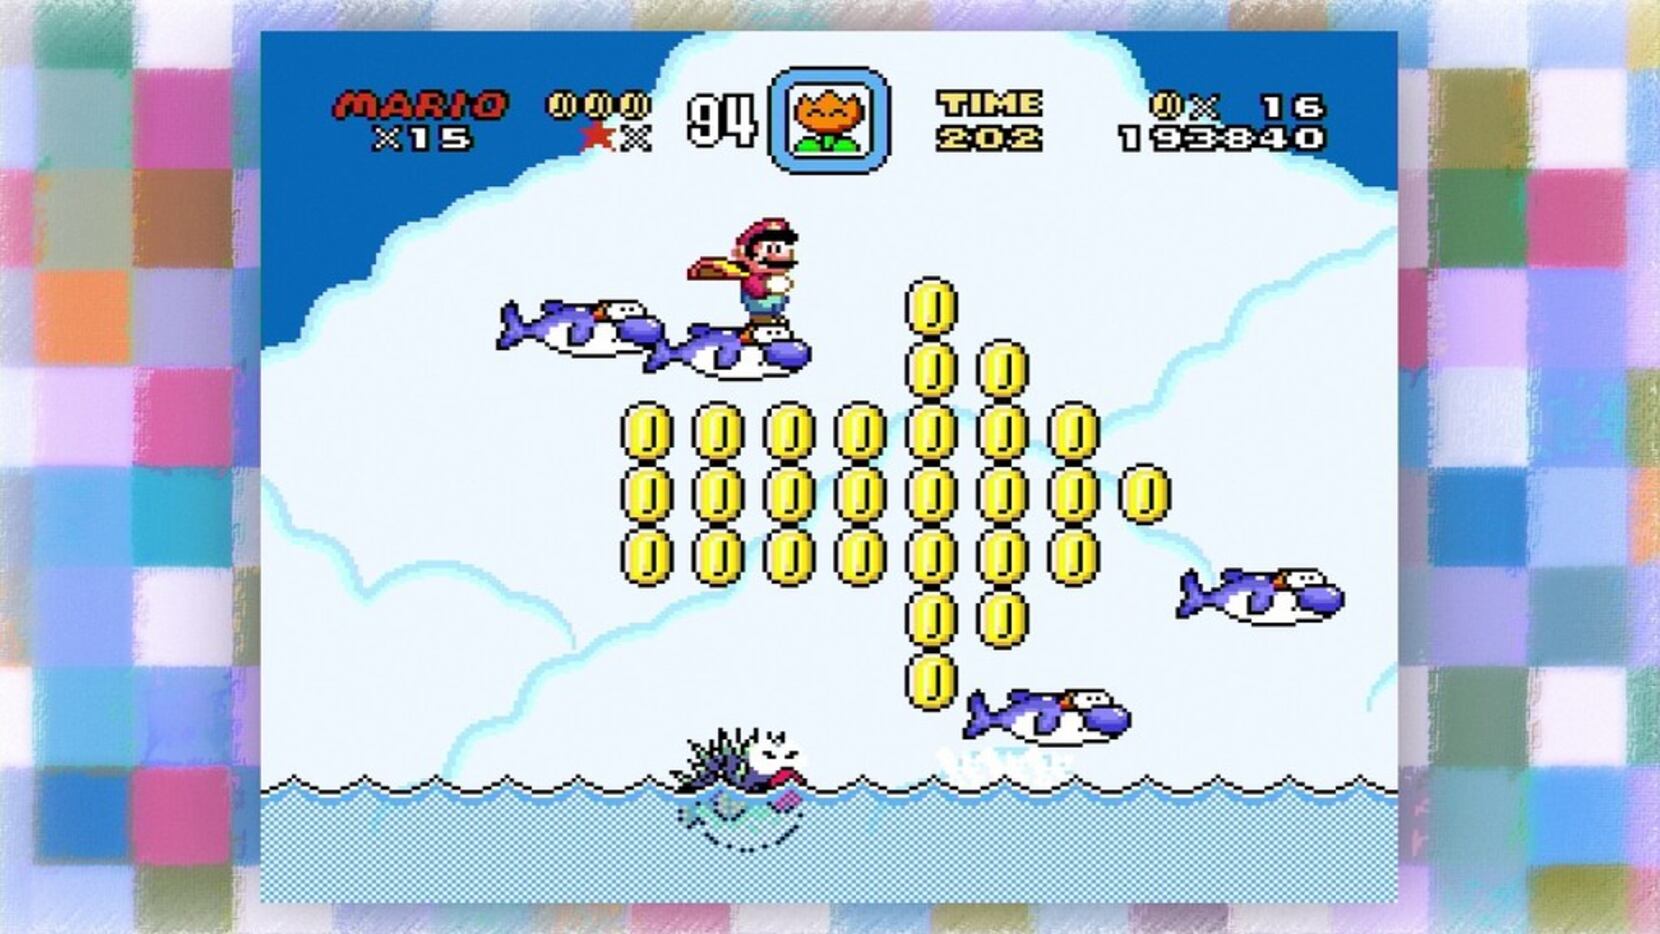 A screenshot of 'Super Mario World' running on the SNES Classic Edition.